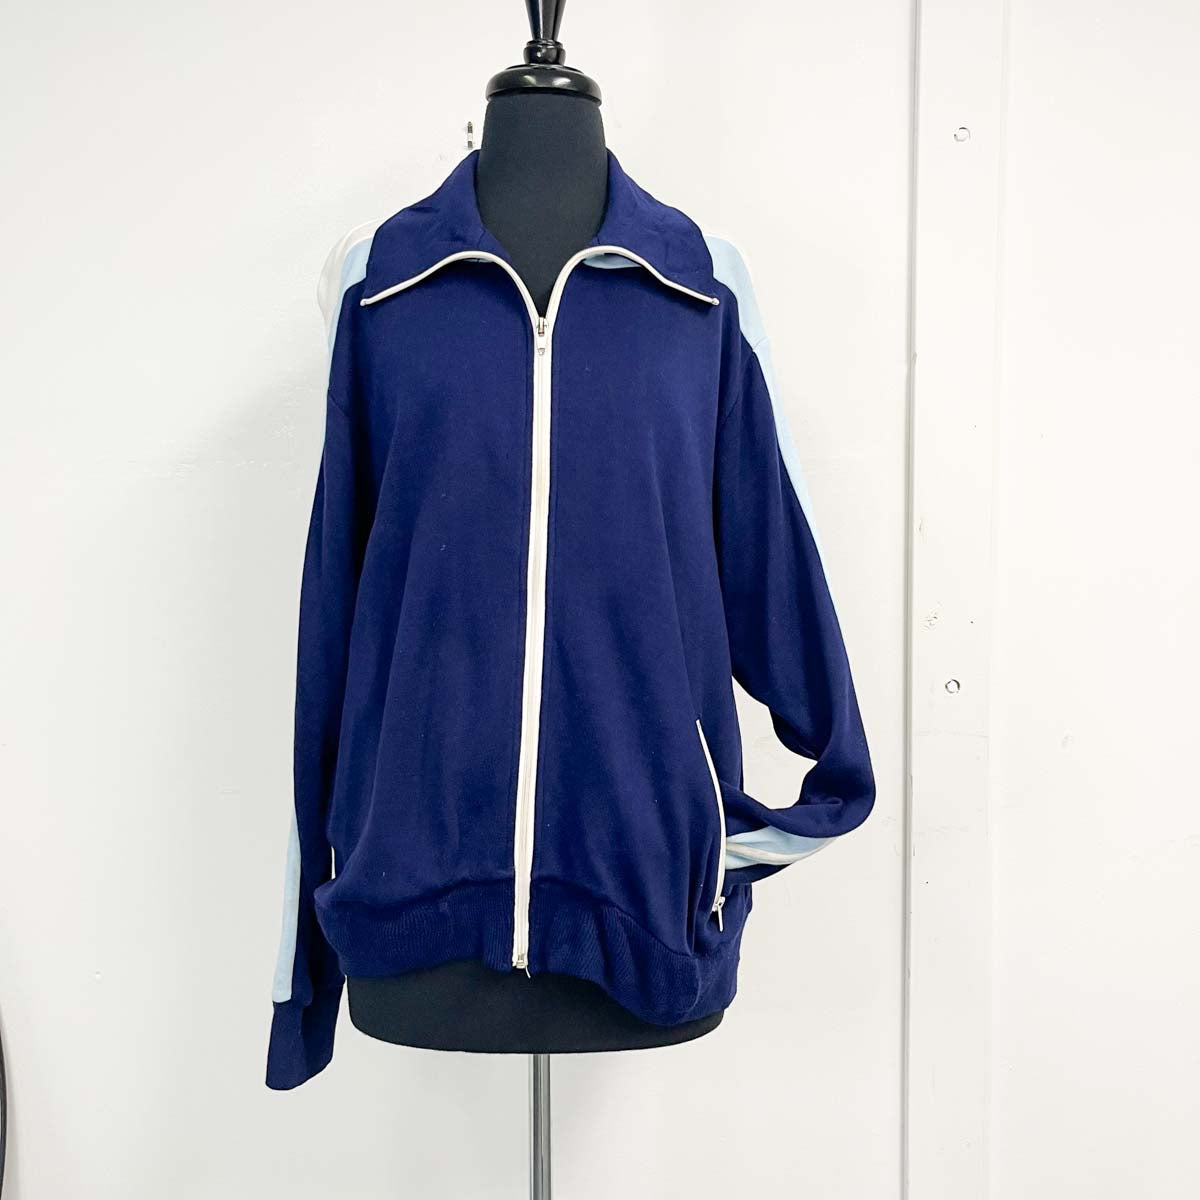 VINTAGE NAVY BLUE AND WHITE TRACK JACKET : REGAL ZIP FRONT